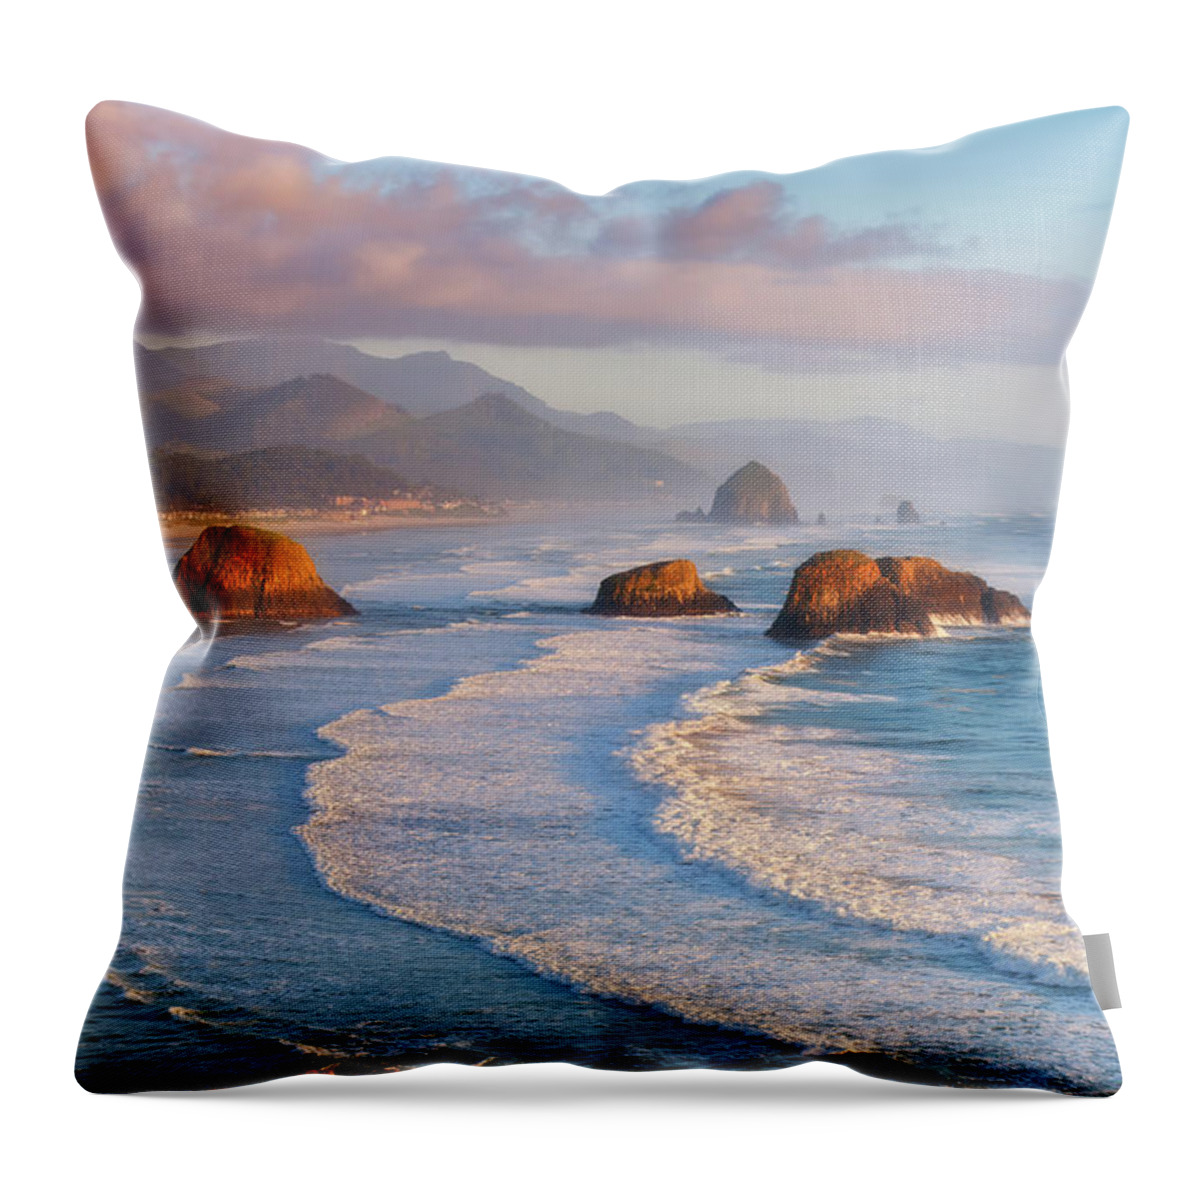 Cannon Beach Throw Pillow featuring the photograph Cannon Beach Sunset by Darren White